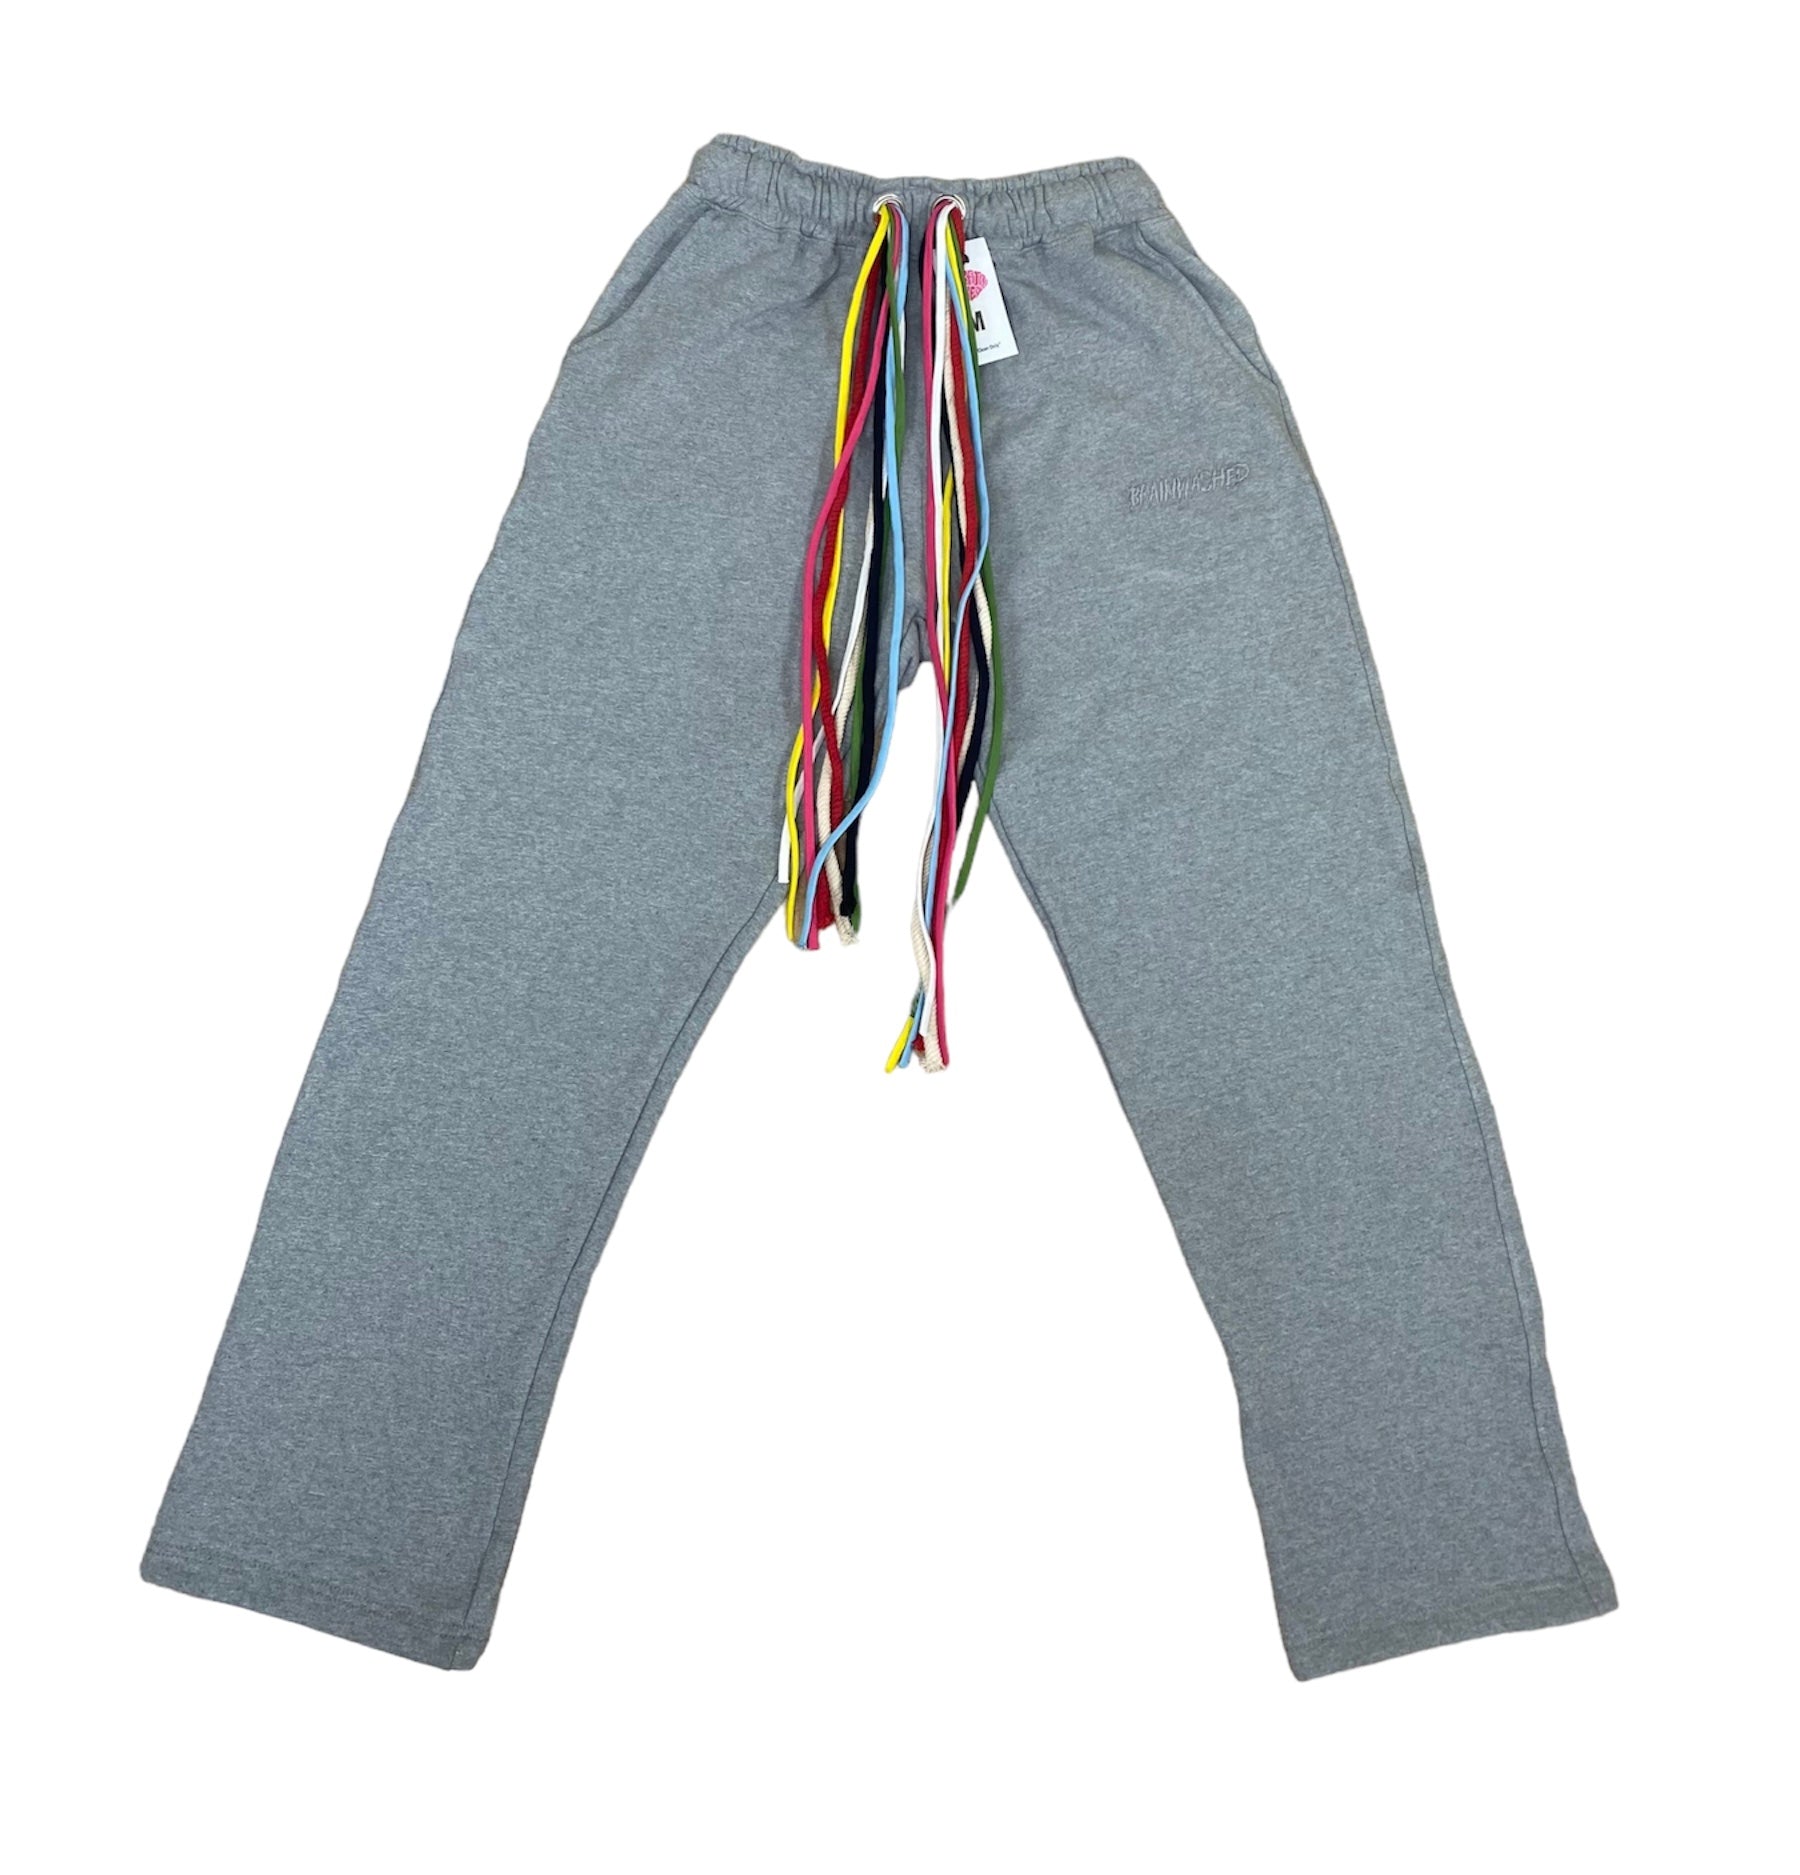 – Grey Sweatpants Color BRAINWASHED Multicord